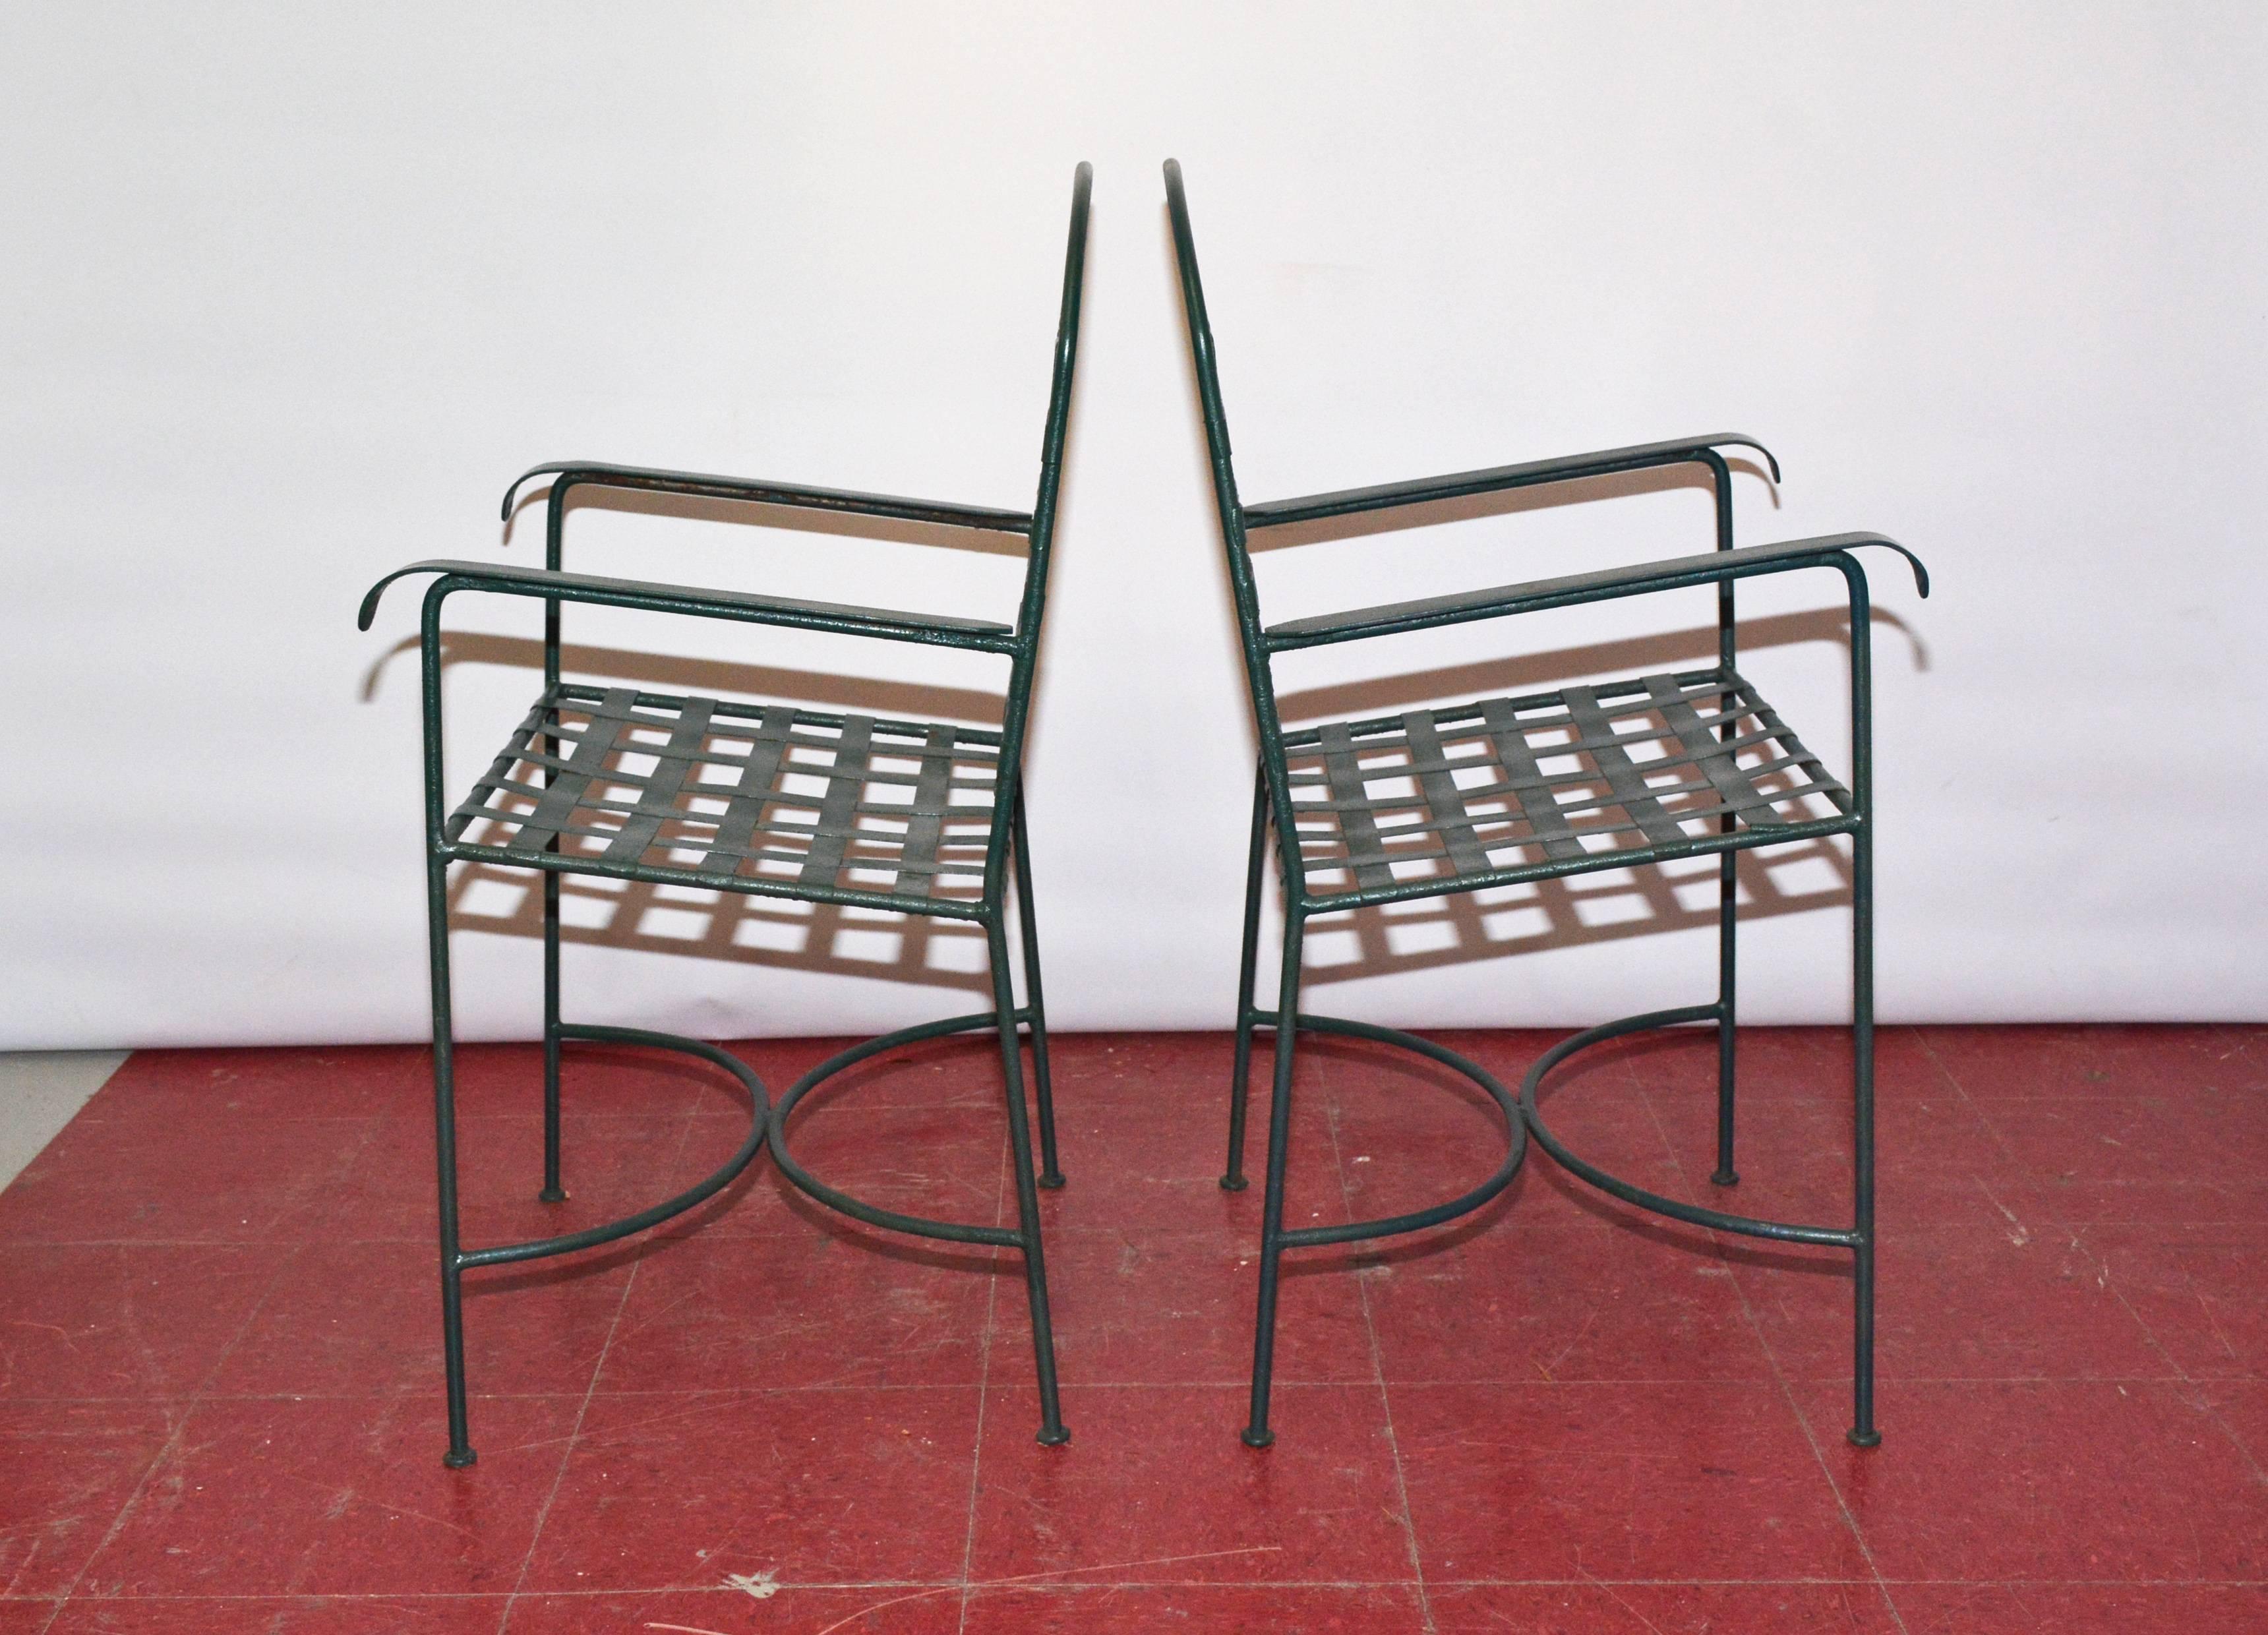 Painted dark green, the wrought iron outdoor chairs are made with woven slated seats and backs and flat arm rests, The legs are secured with semi-cirular stretchers. No number.

Measures: Arm 25.25